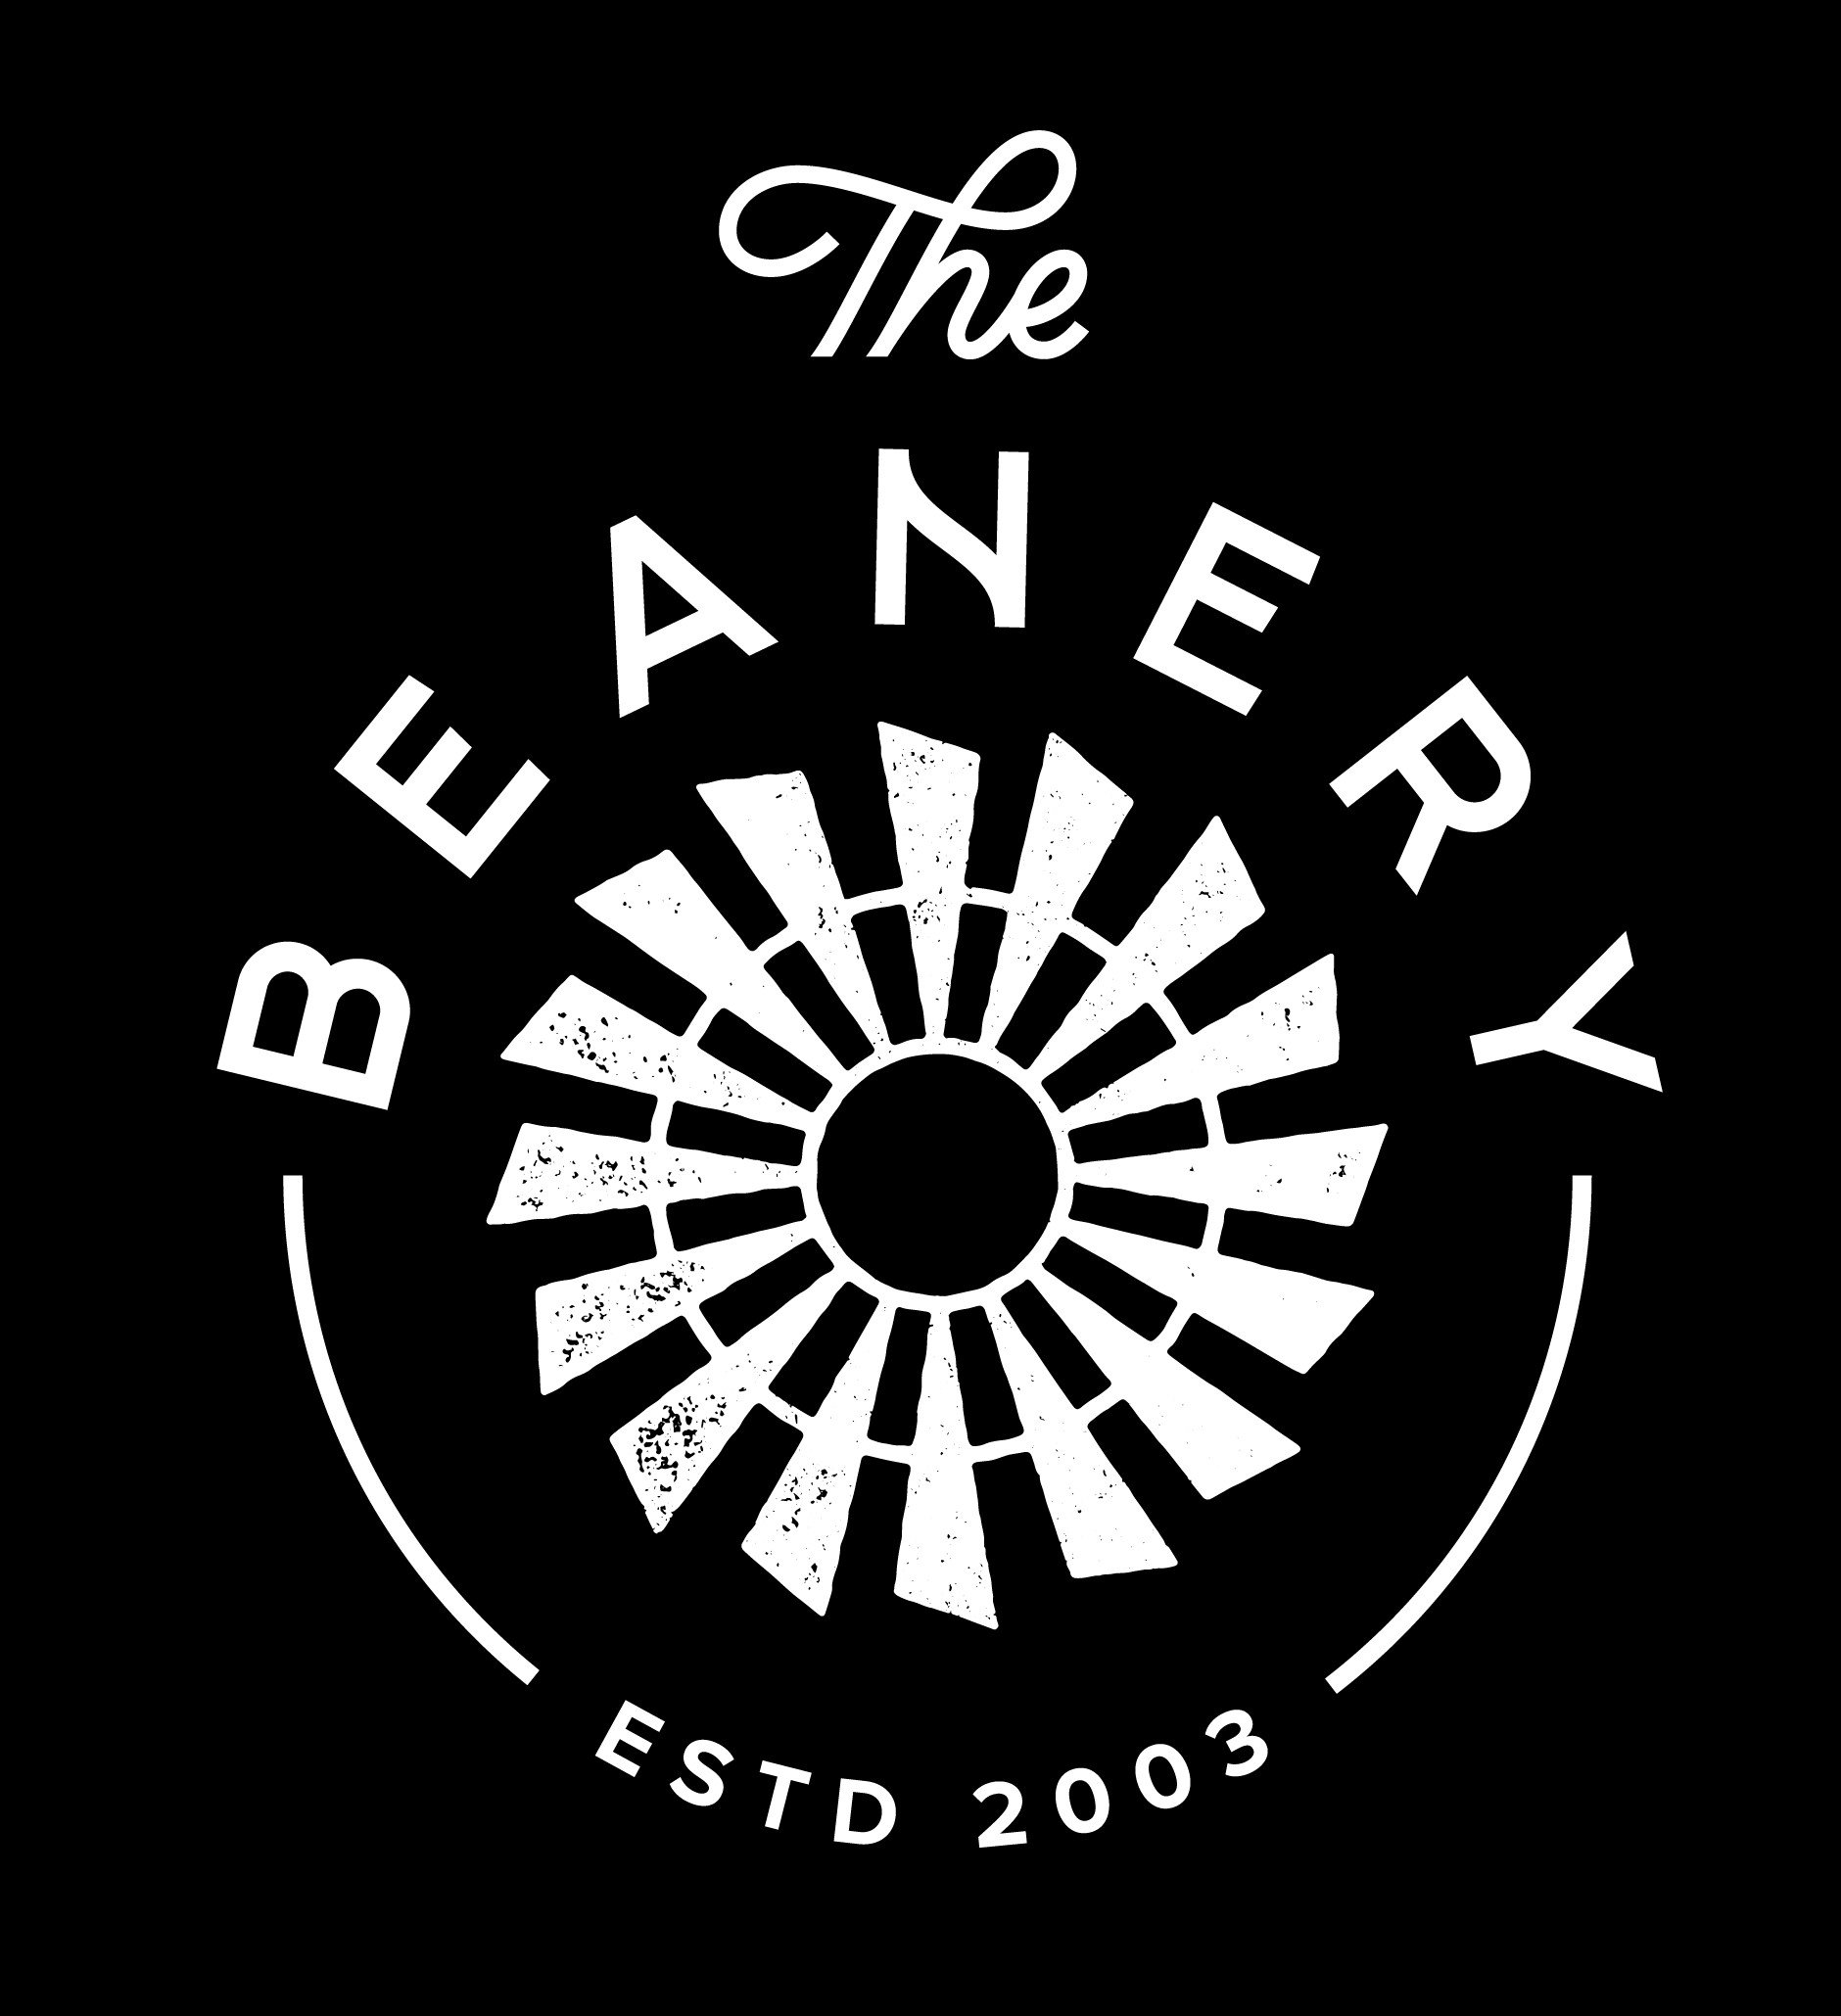 Serving People. Coffee.  Located in Ashland, Gretna and Papillion, NE @thebeaneryNE everywhere